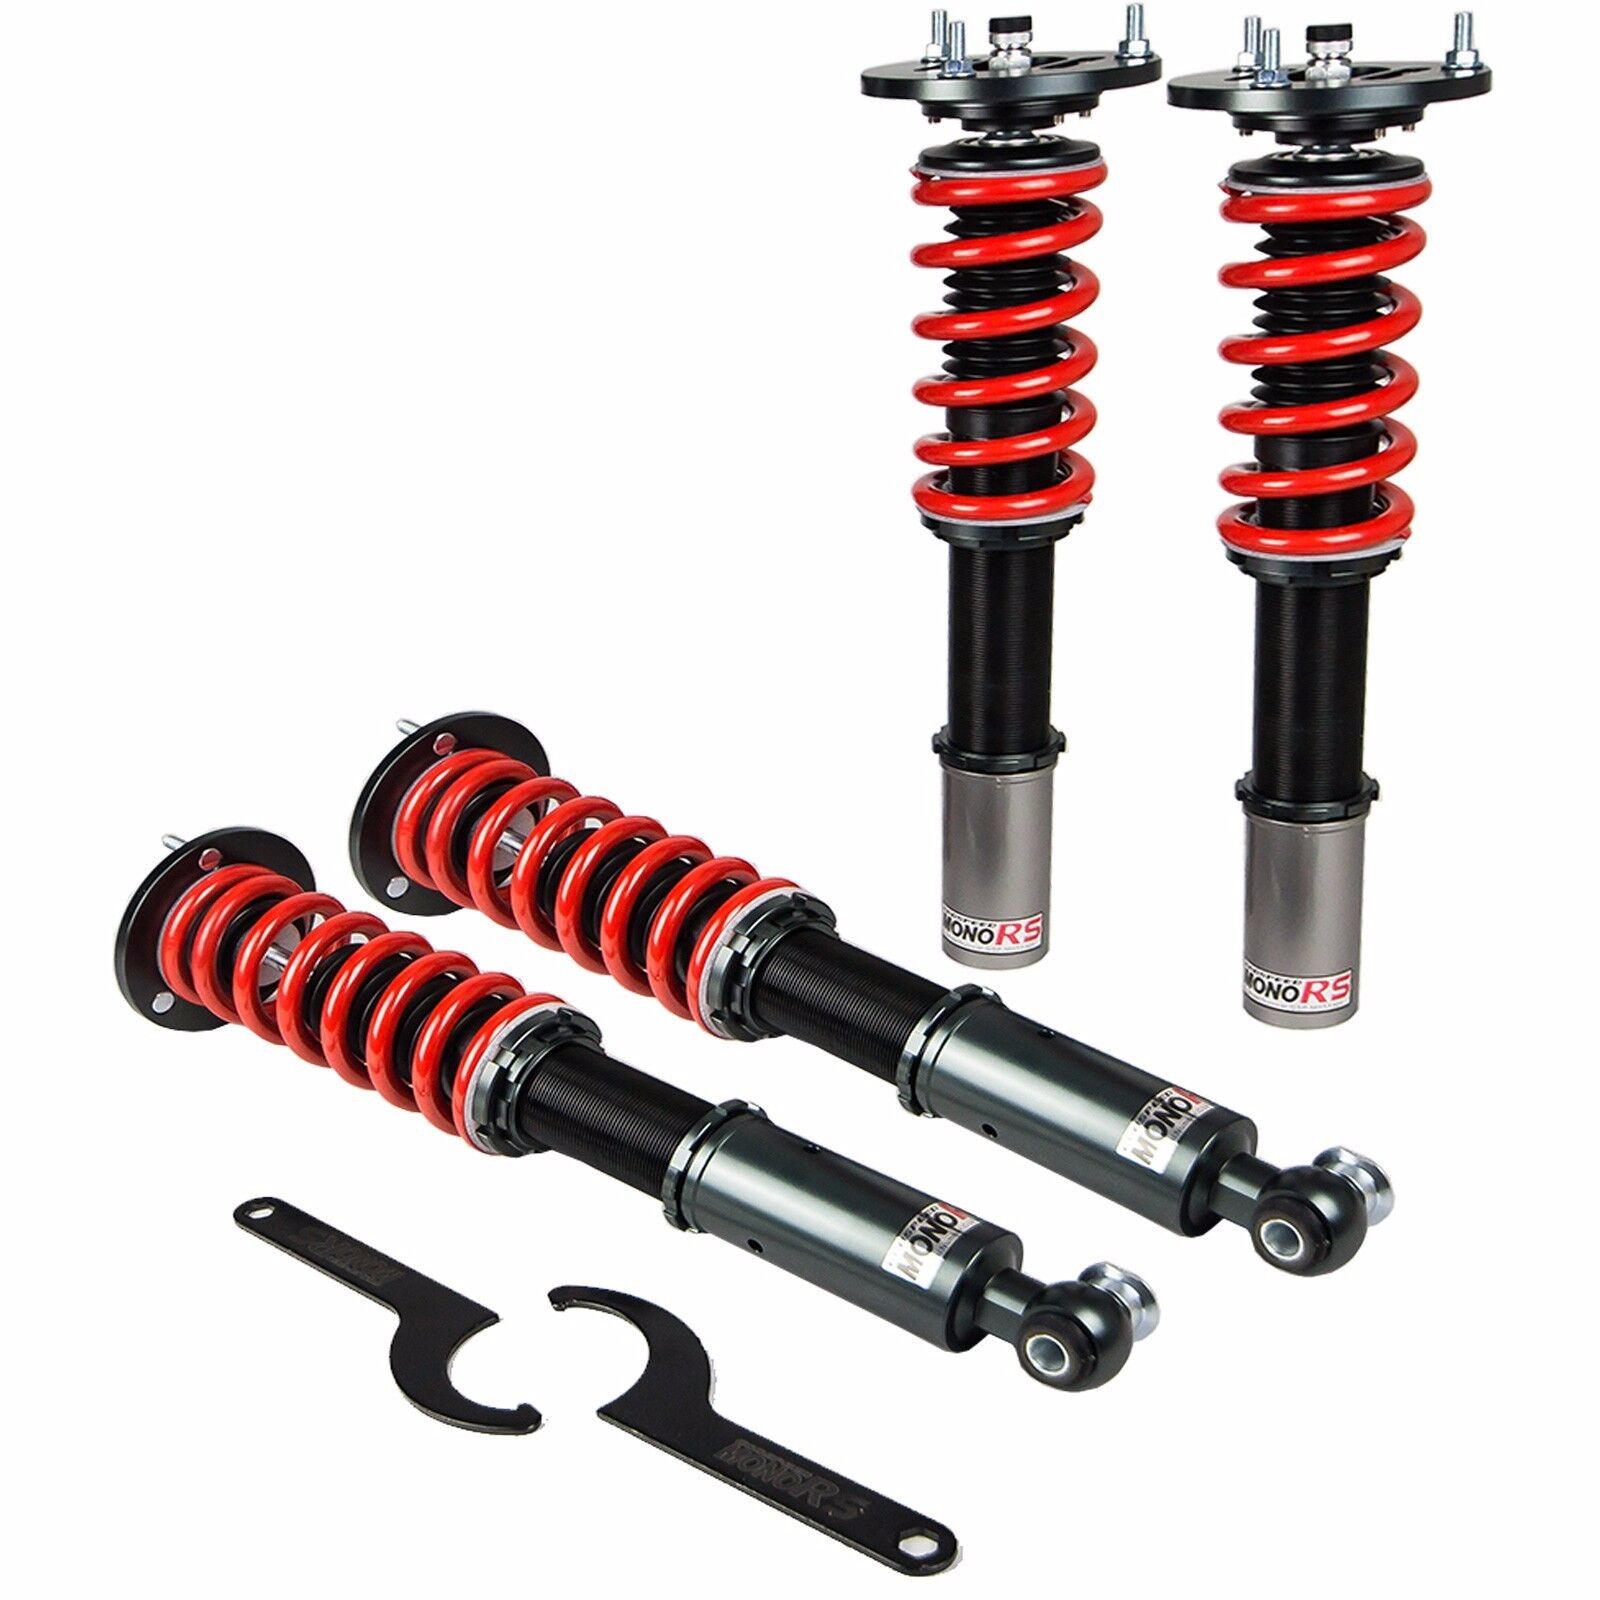 FOR BMW 5 SERIES 96-03 E39 GODSPEED MONORS COILOVER SUSPENSION CAMBER PLATE